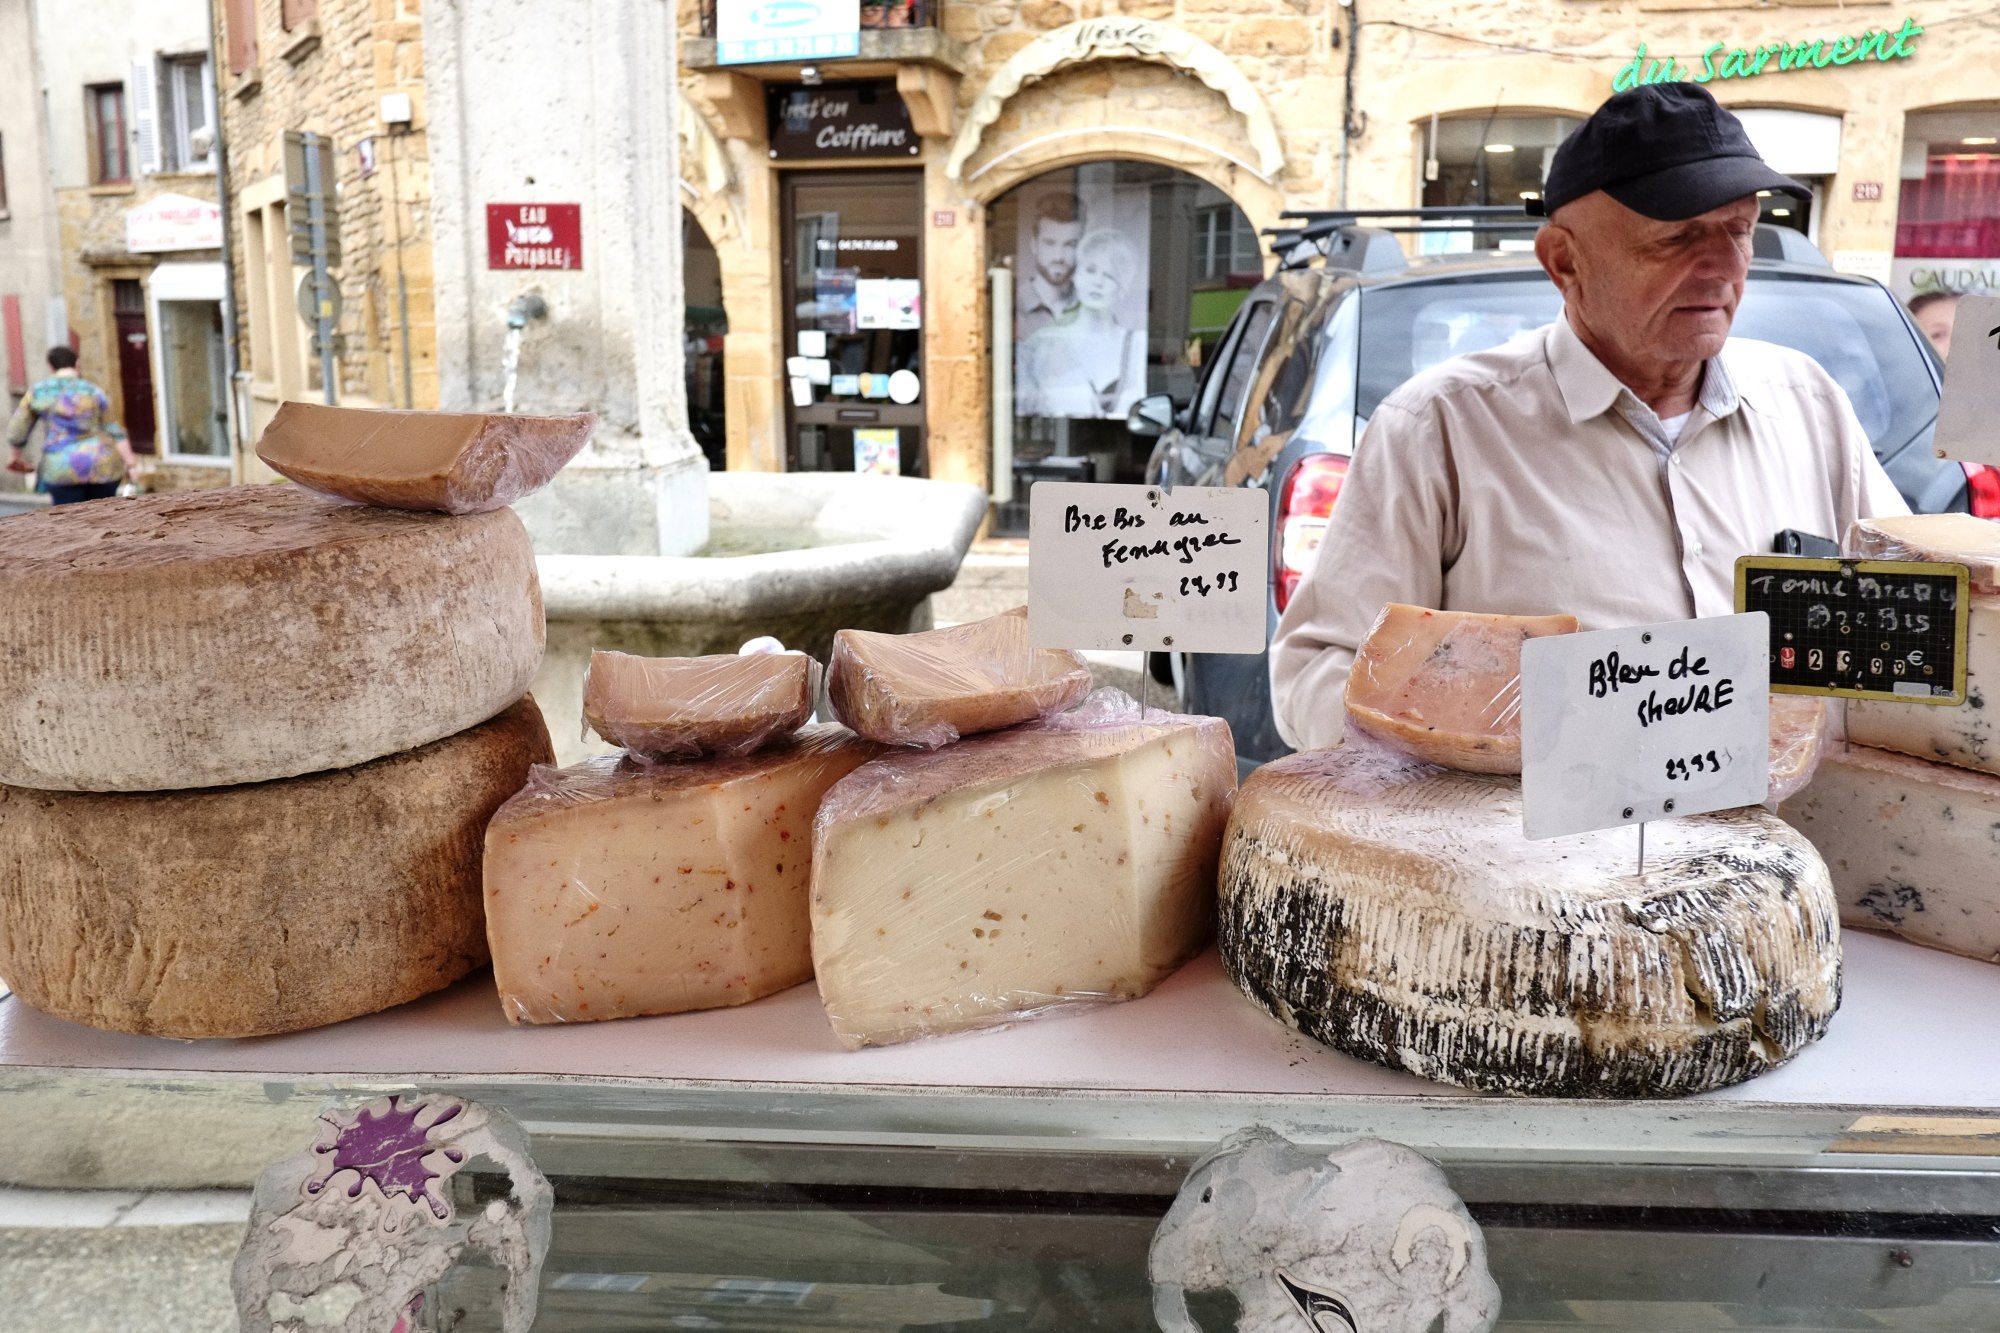 A fromage vendor at his stall, market day in Le Bois-d'Oingt. Food and travel lifestyle photography by Kent Johnson.